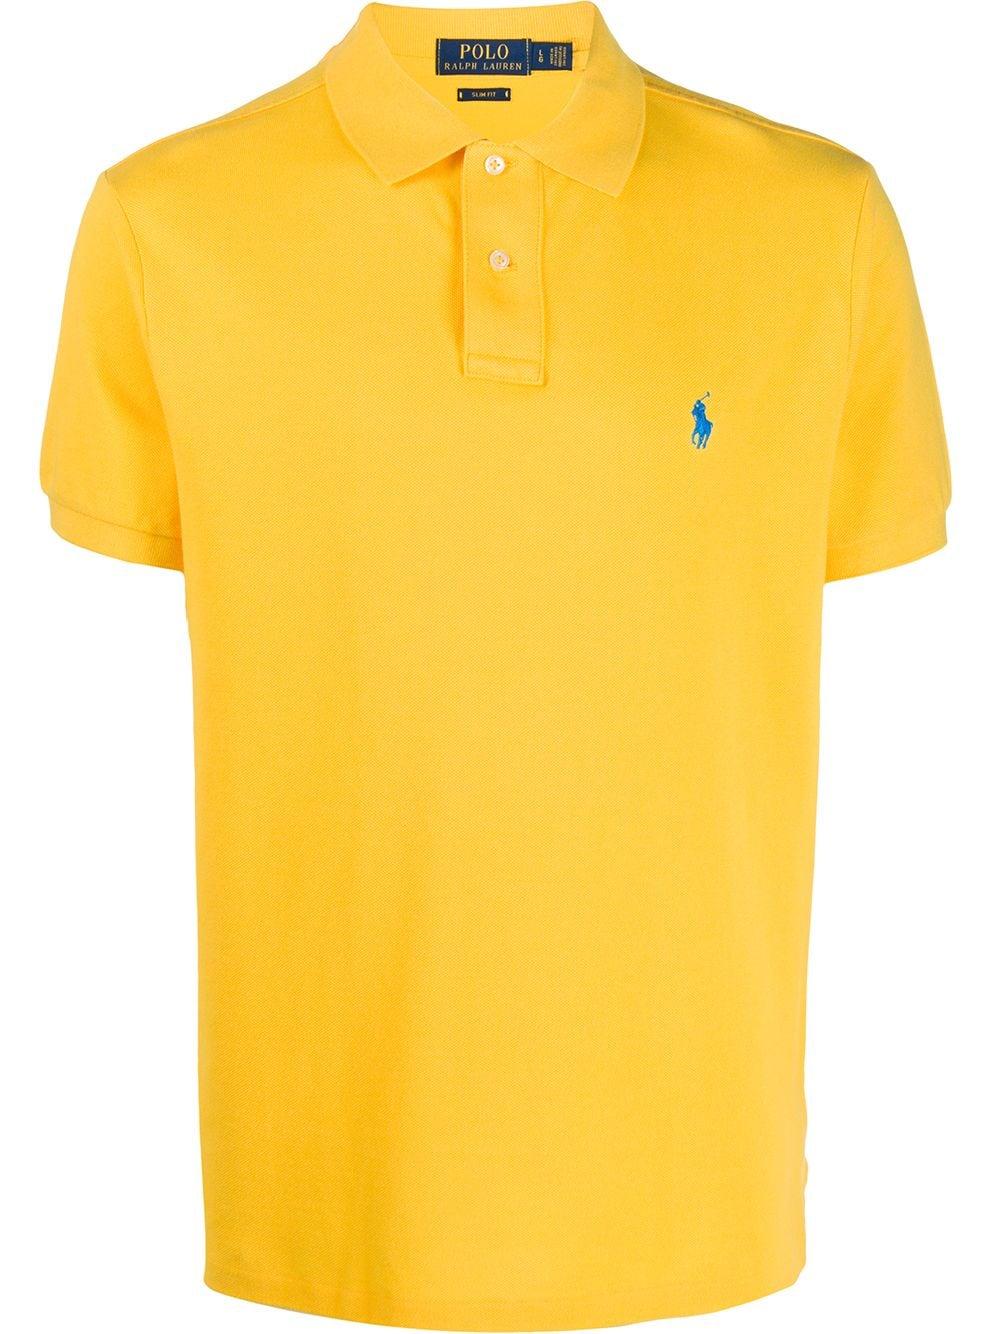 Ralph Lauren Cotton Embroidered Logo Polo Shirt in Yellow for Men - Lyst